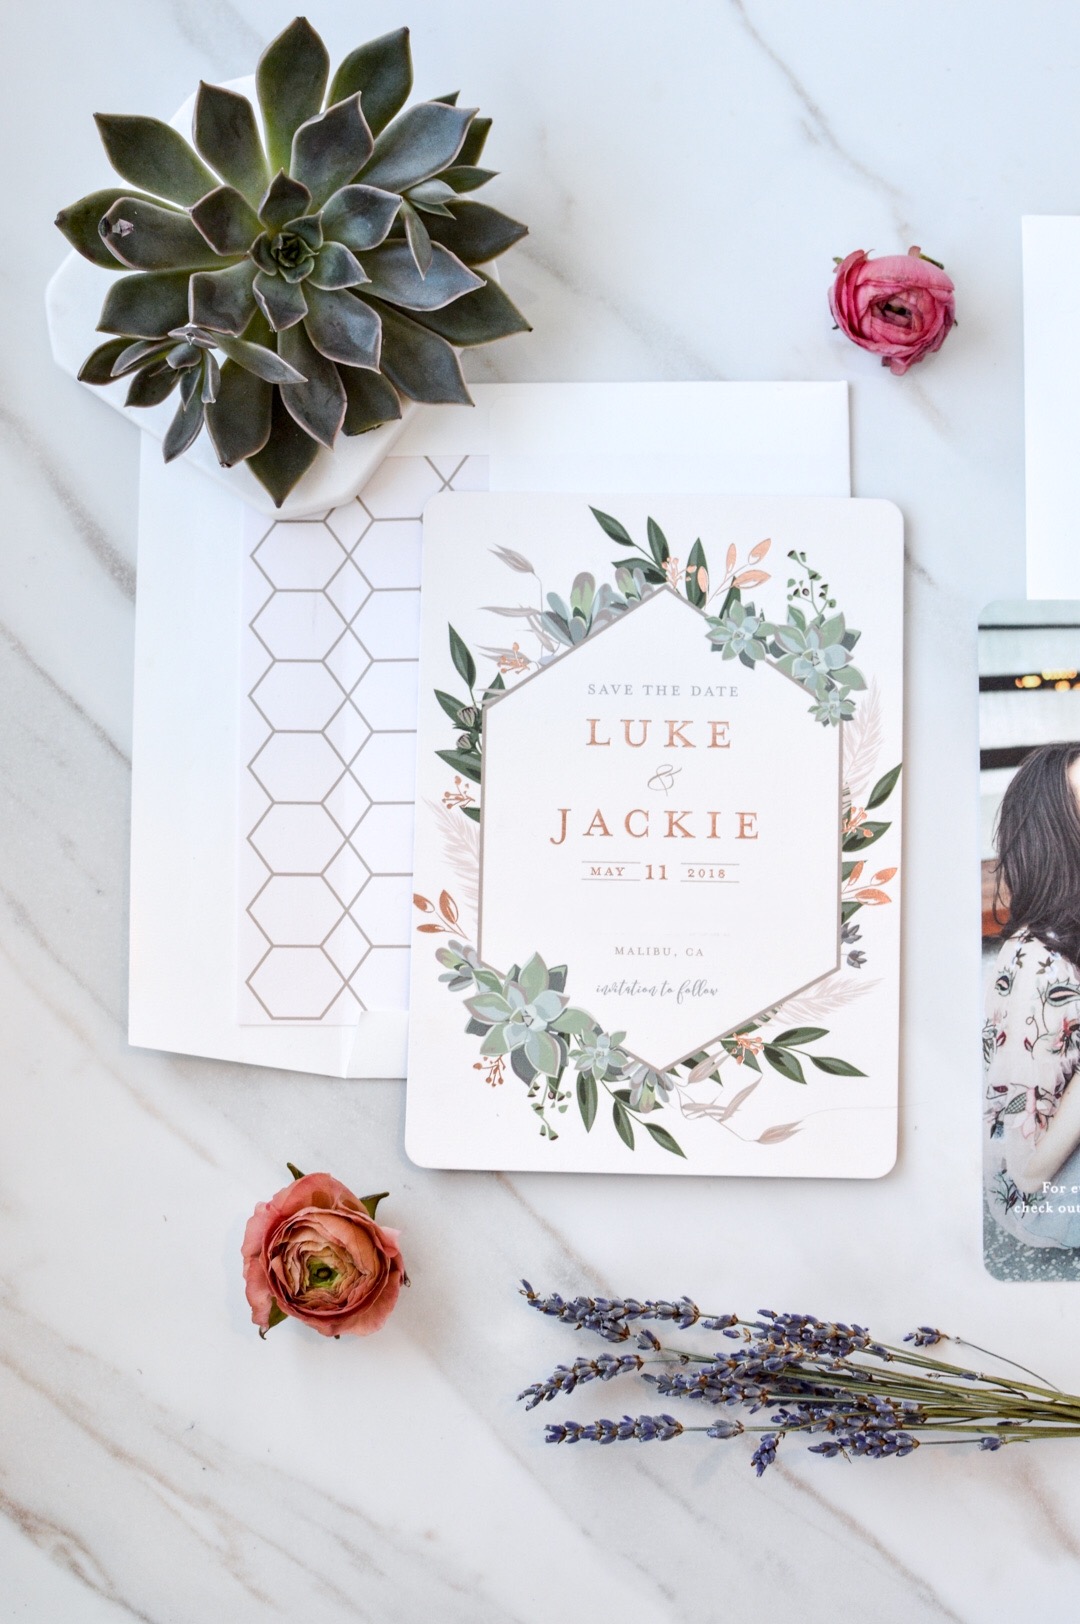 Jackie and Luke's Save the date from Minted